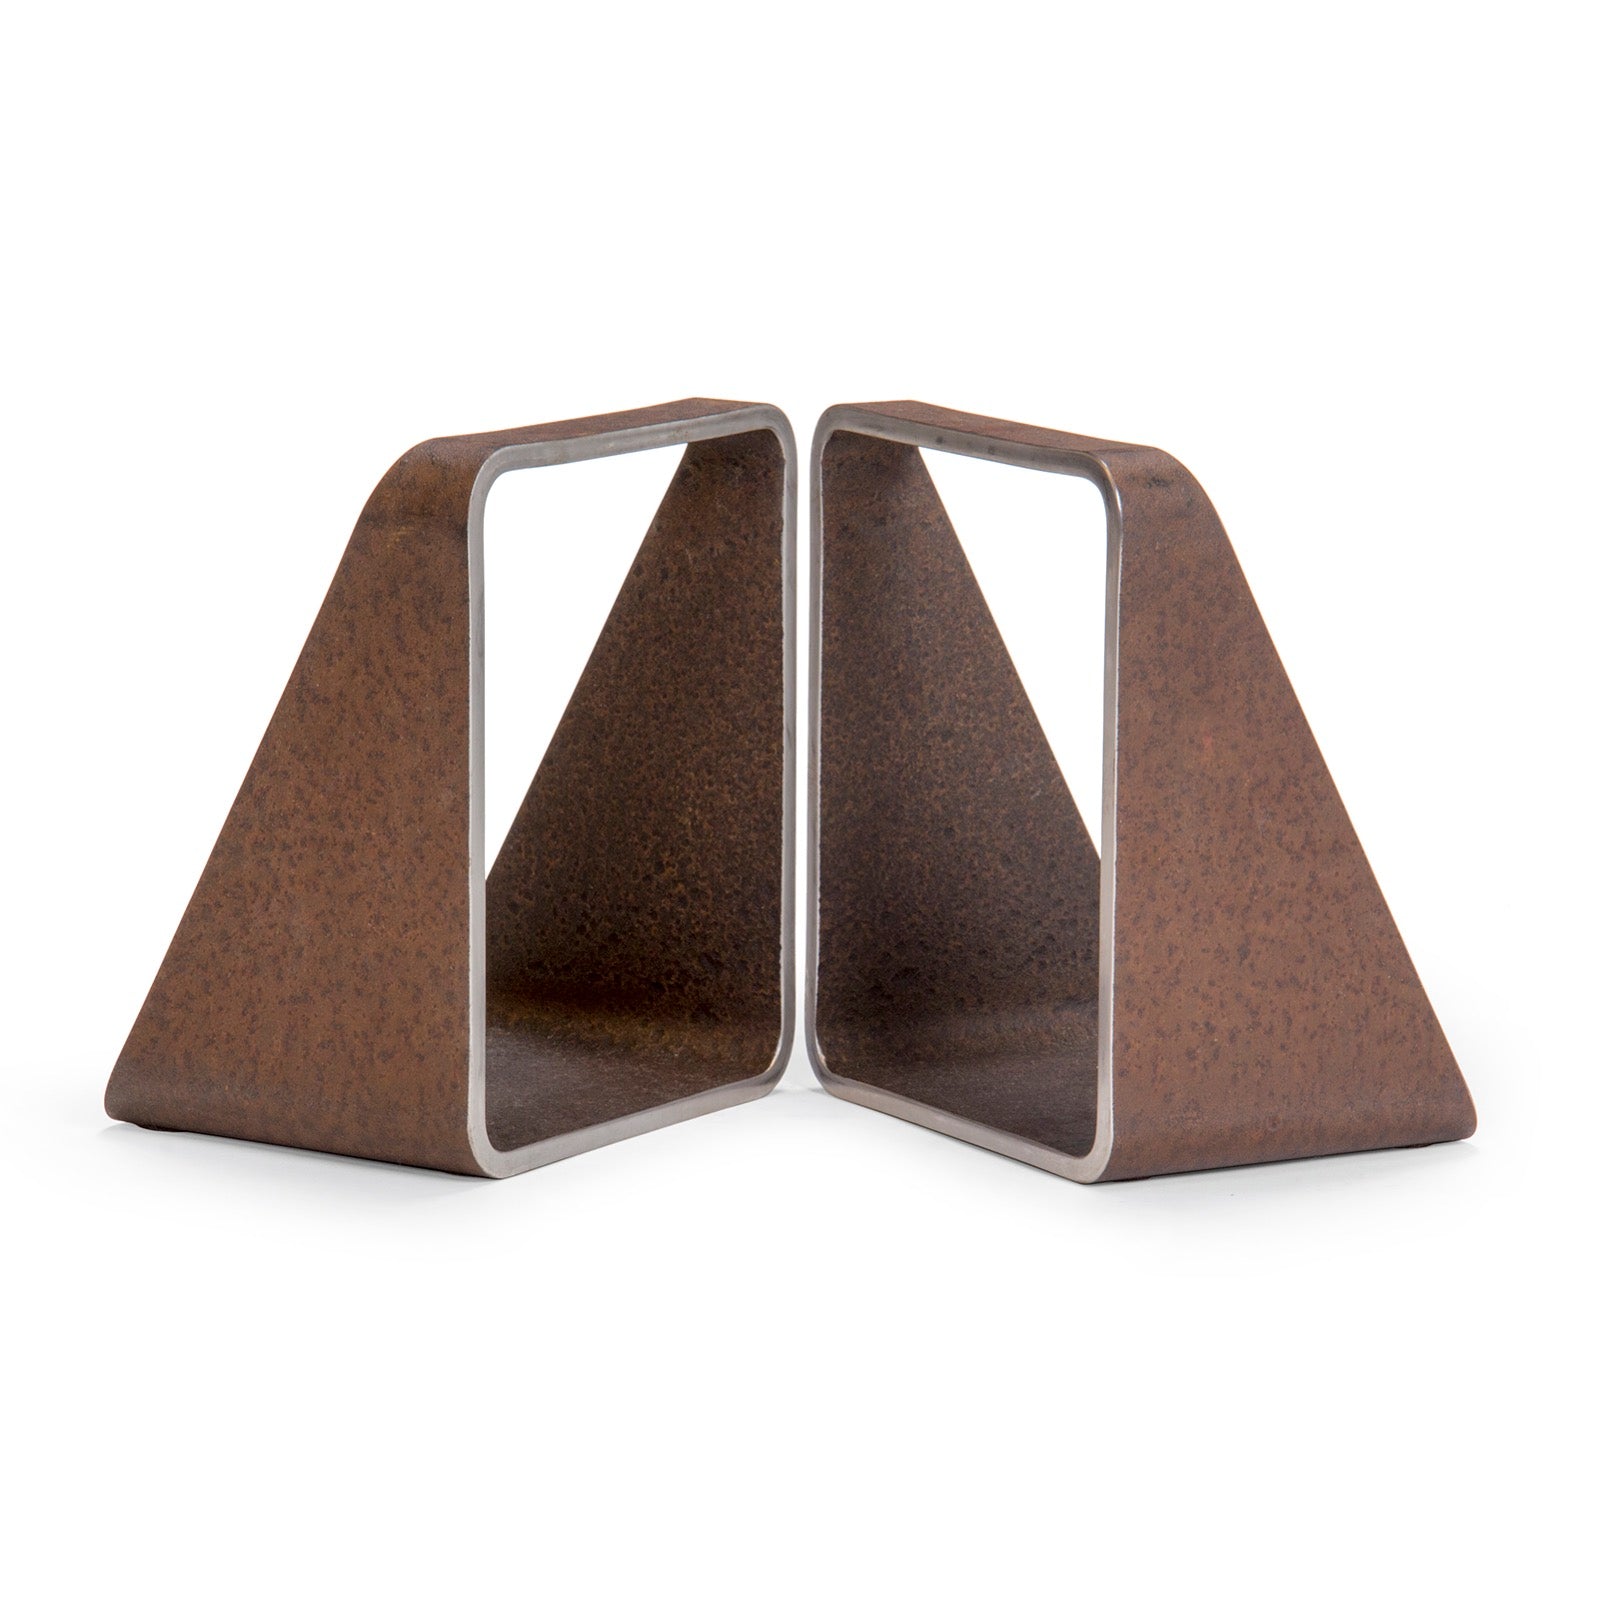 Architectural Steel Bookends by WYETH